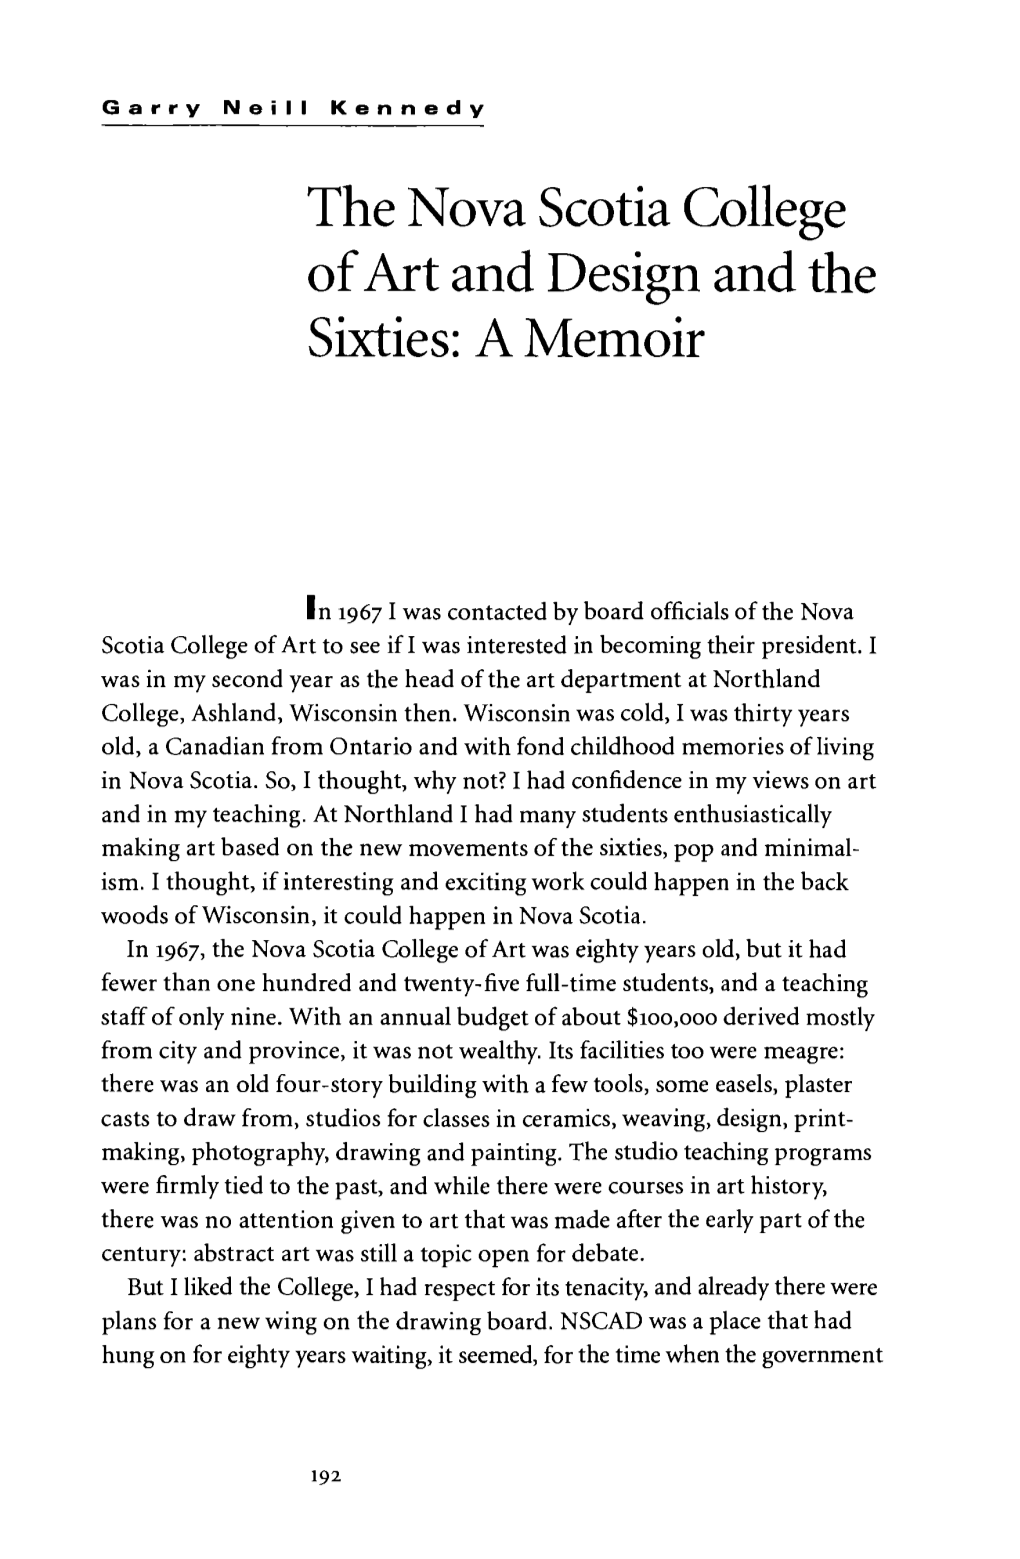 The Nova Scotia College of Art and Design and the Sixties: a Memoir